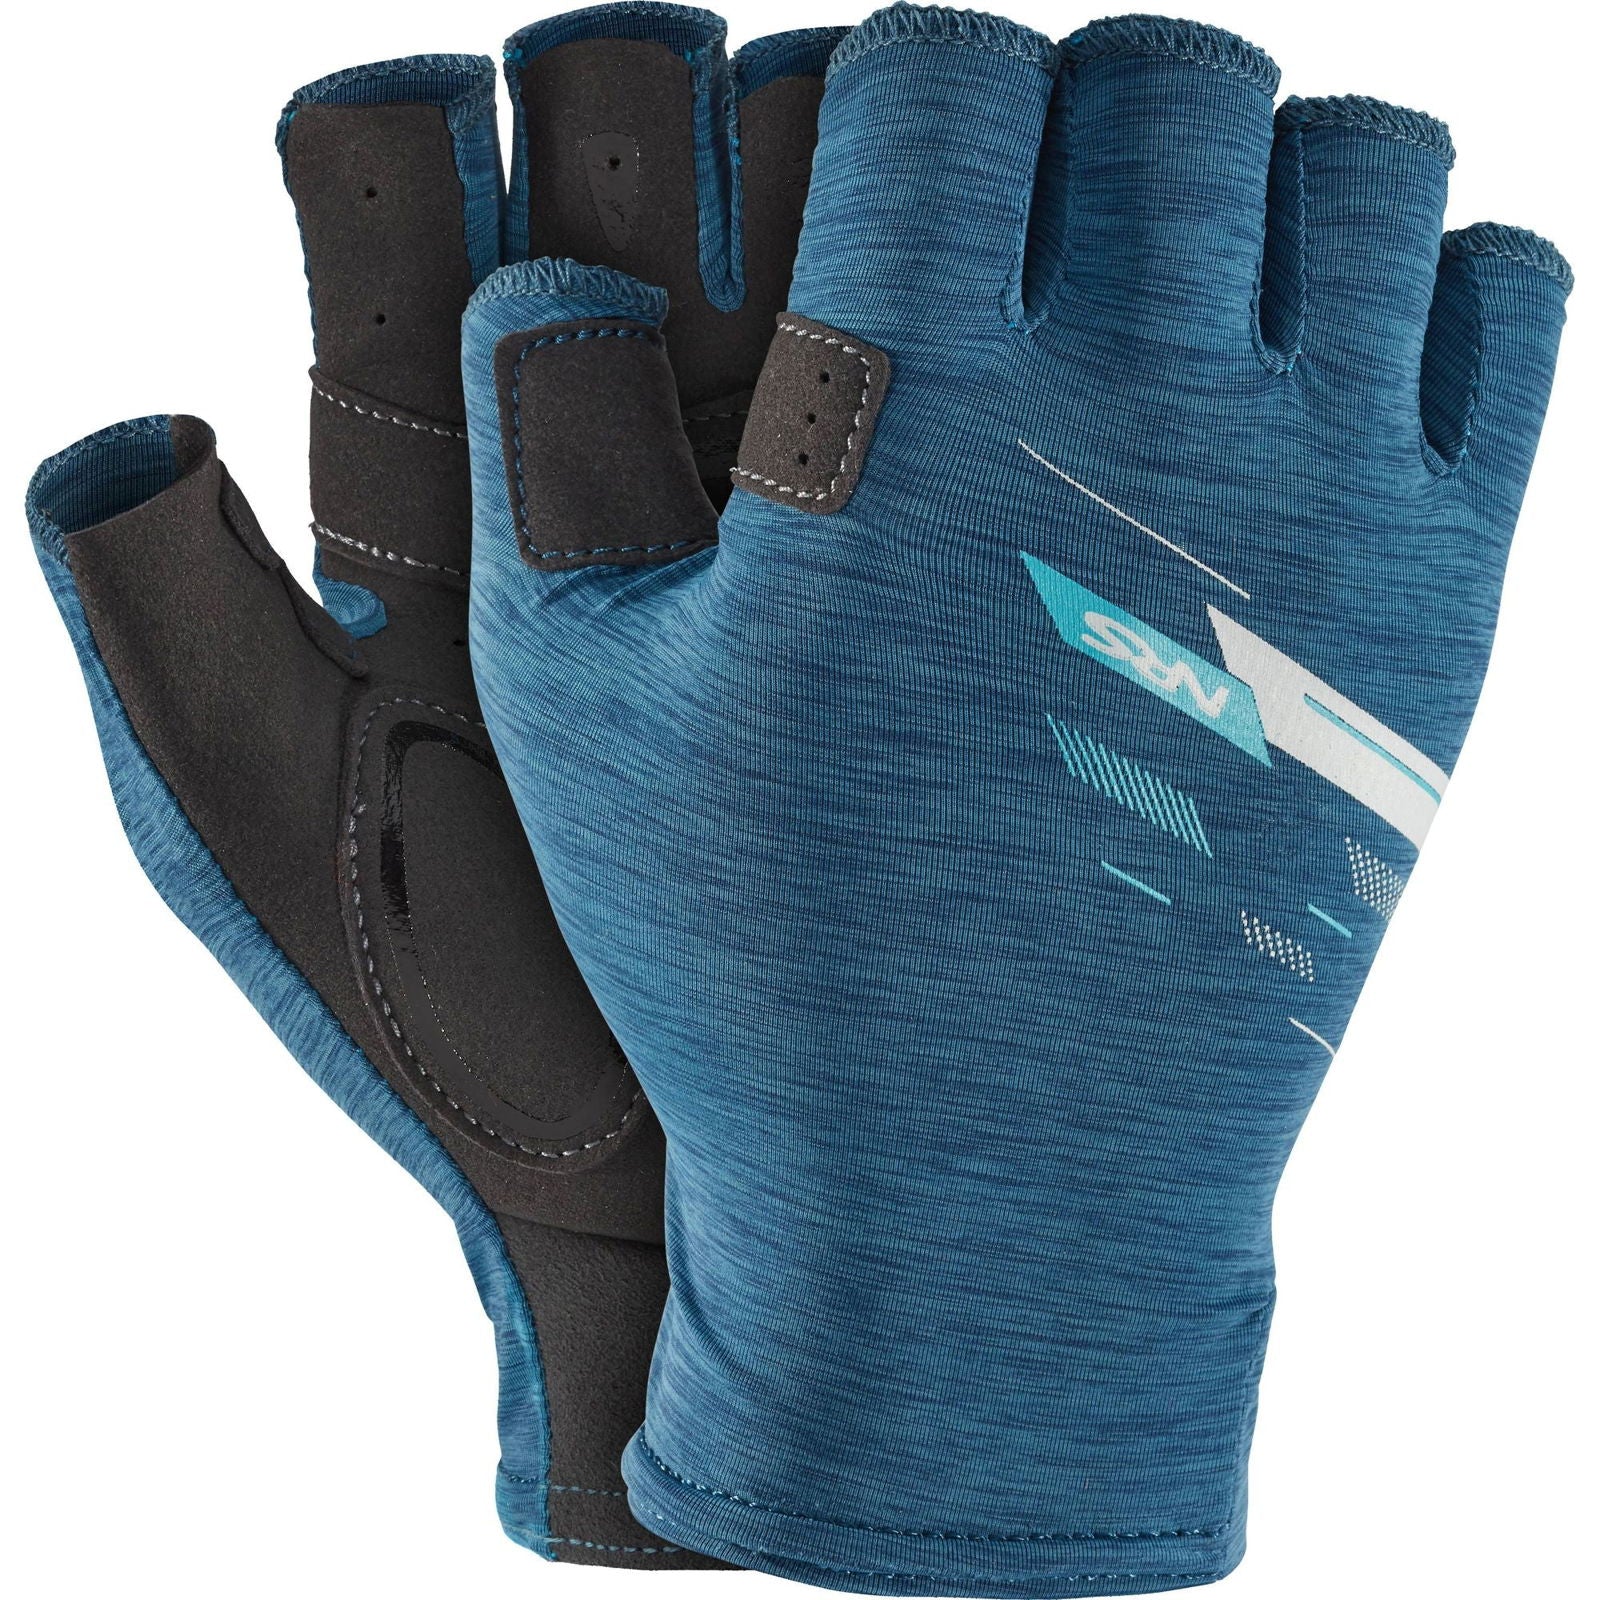 NRS  Men's Boater Gloves  BestCoast Outfitters 